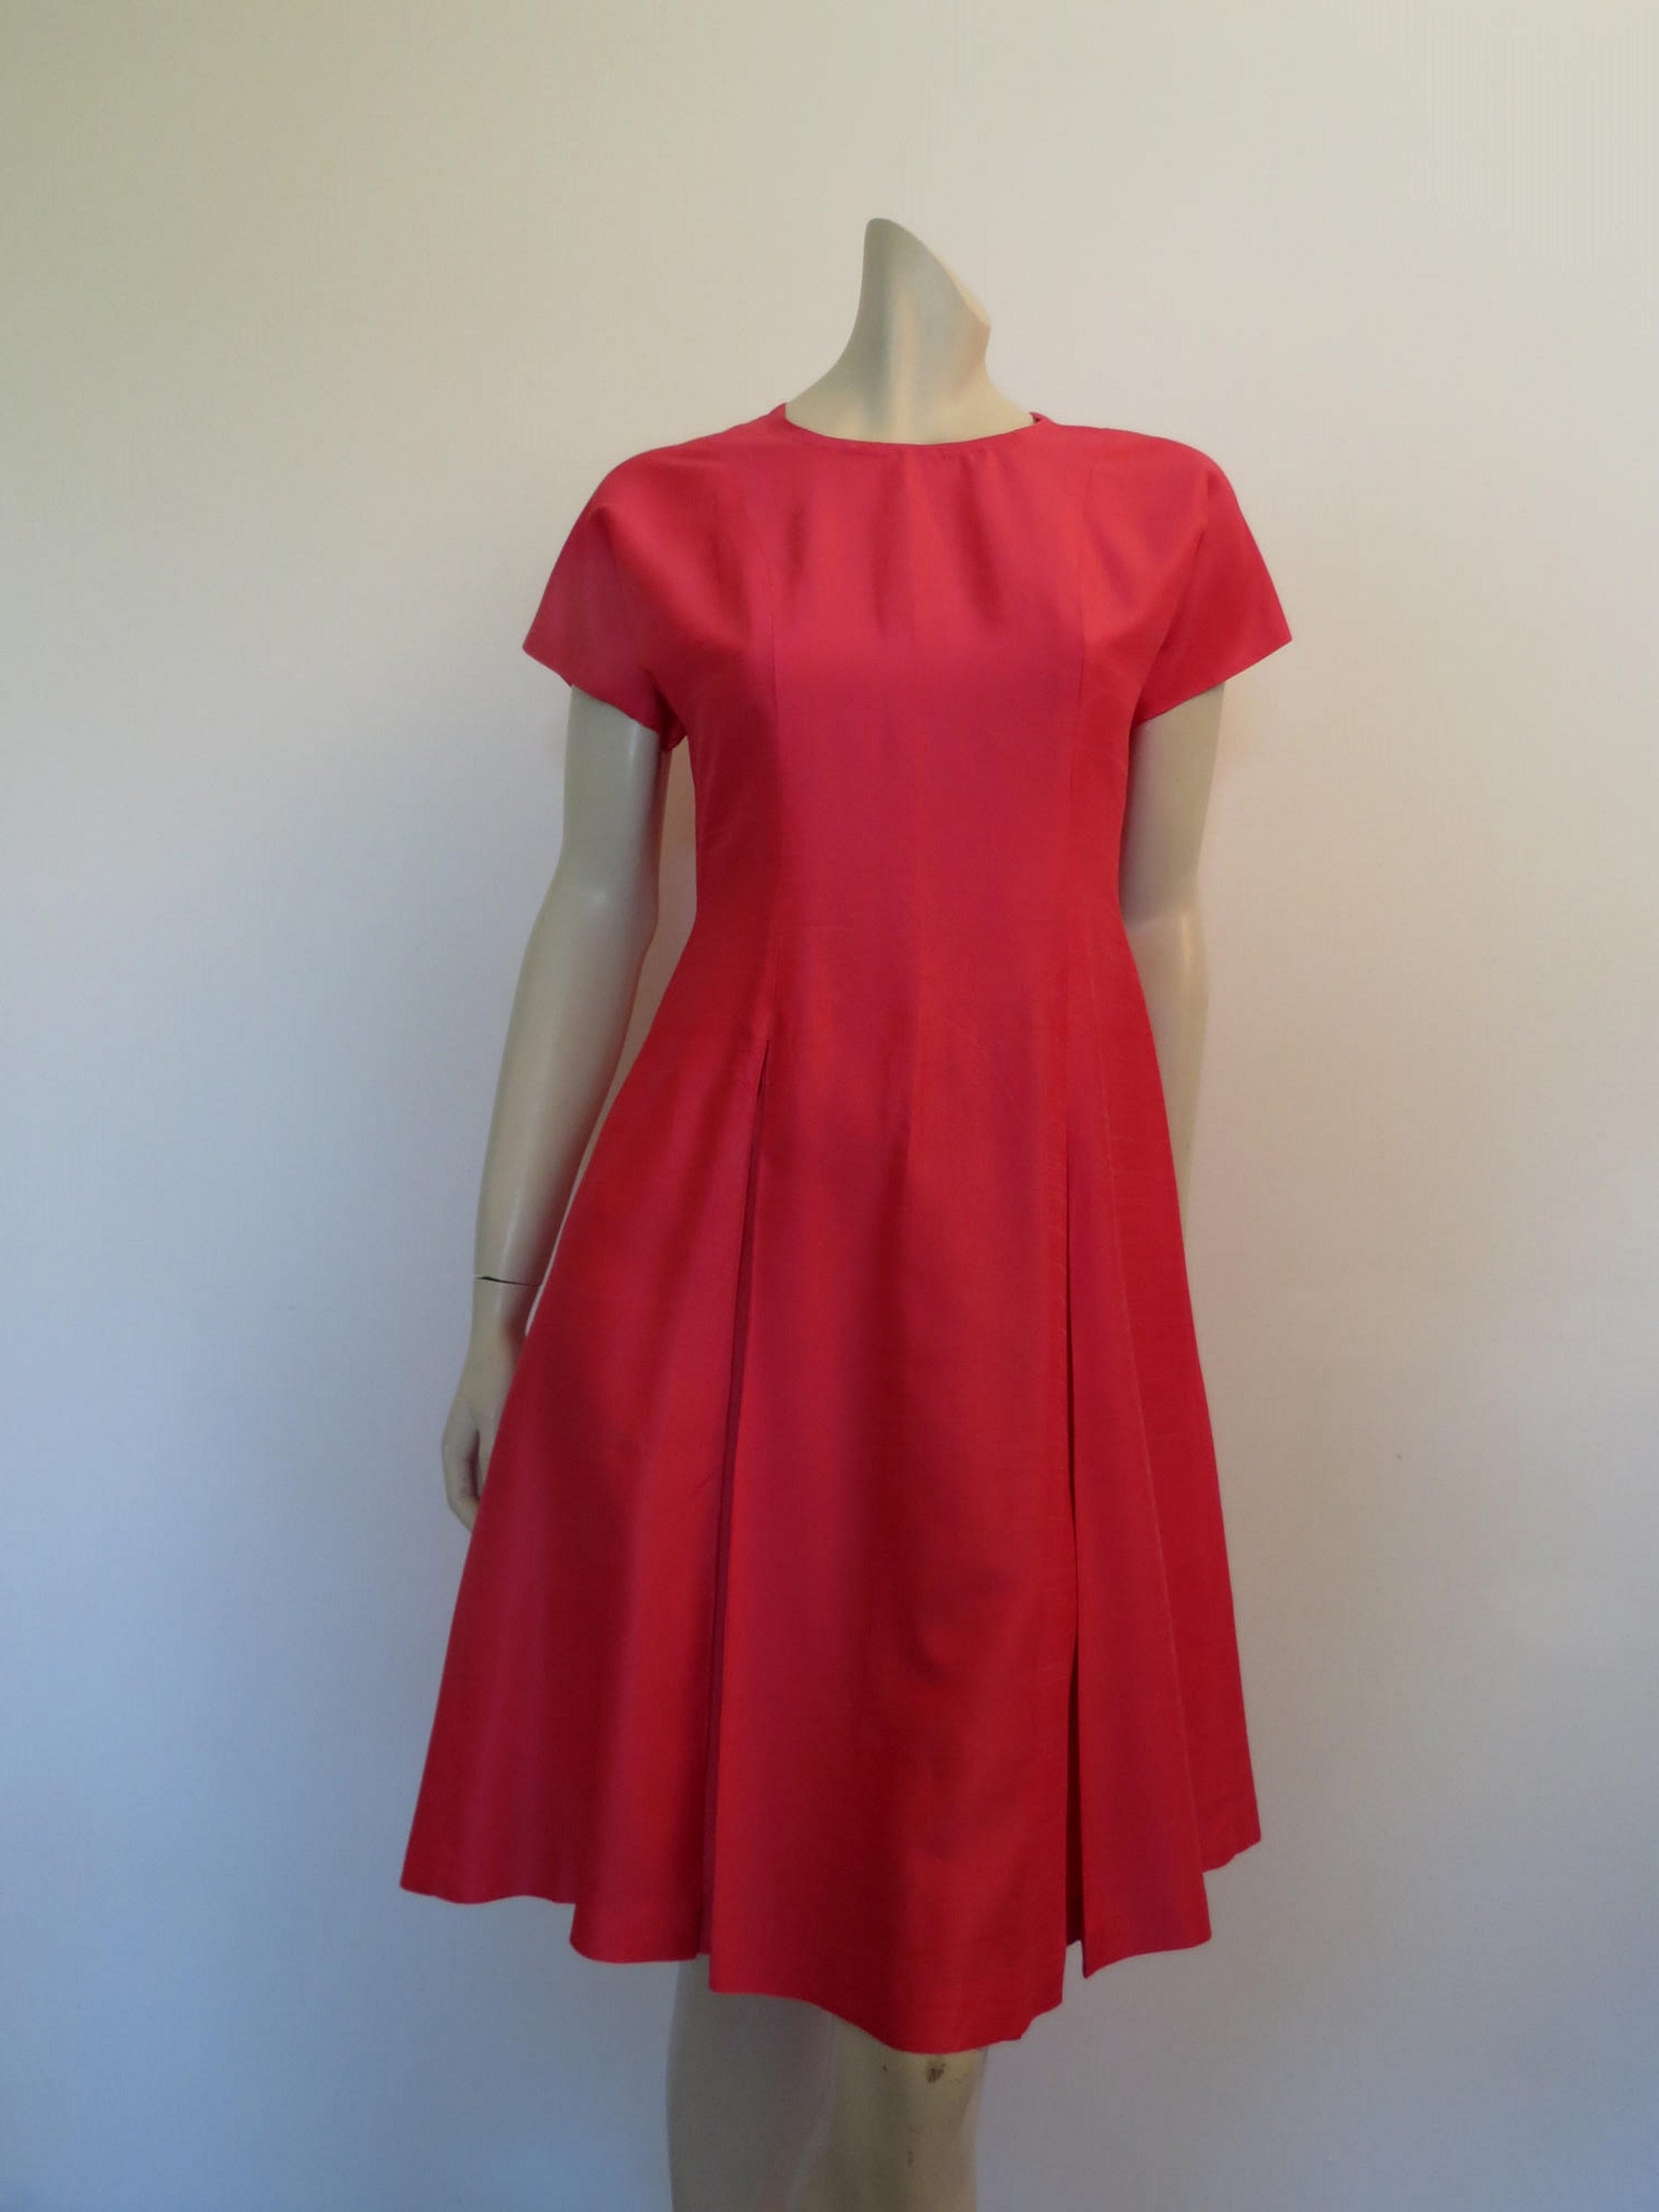 1960s vintage cyclamen pink dress with flared skirt inverted pleats